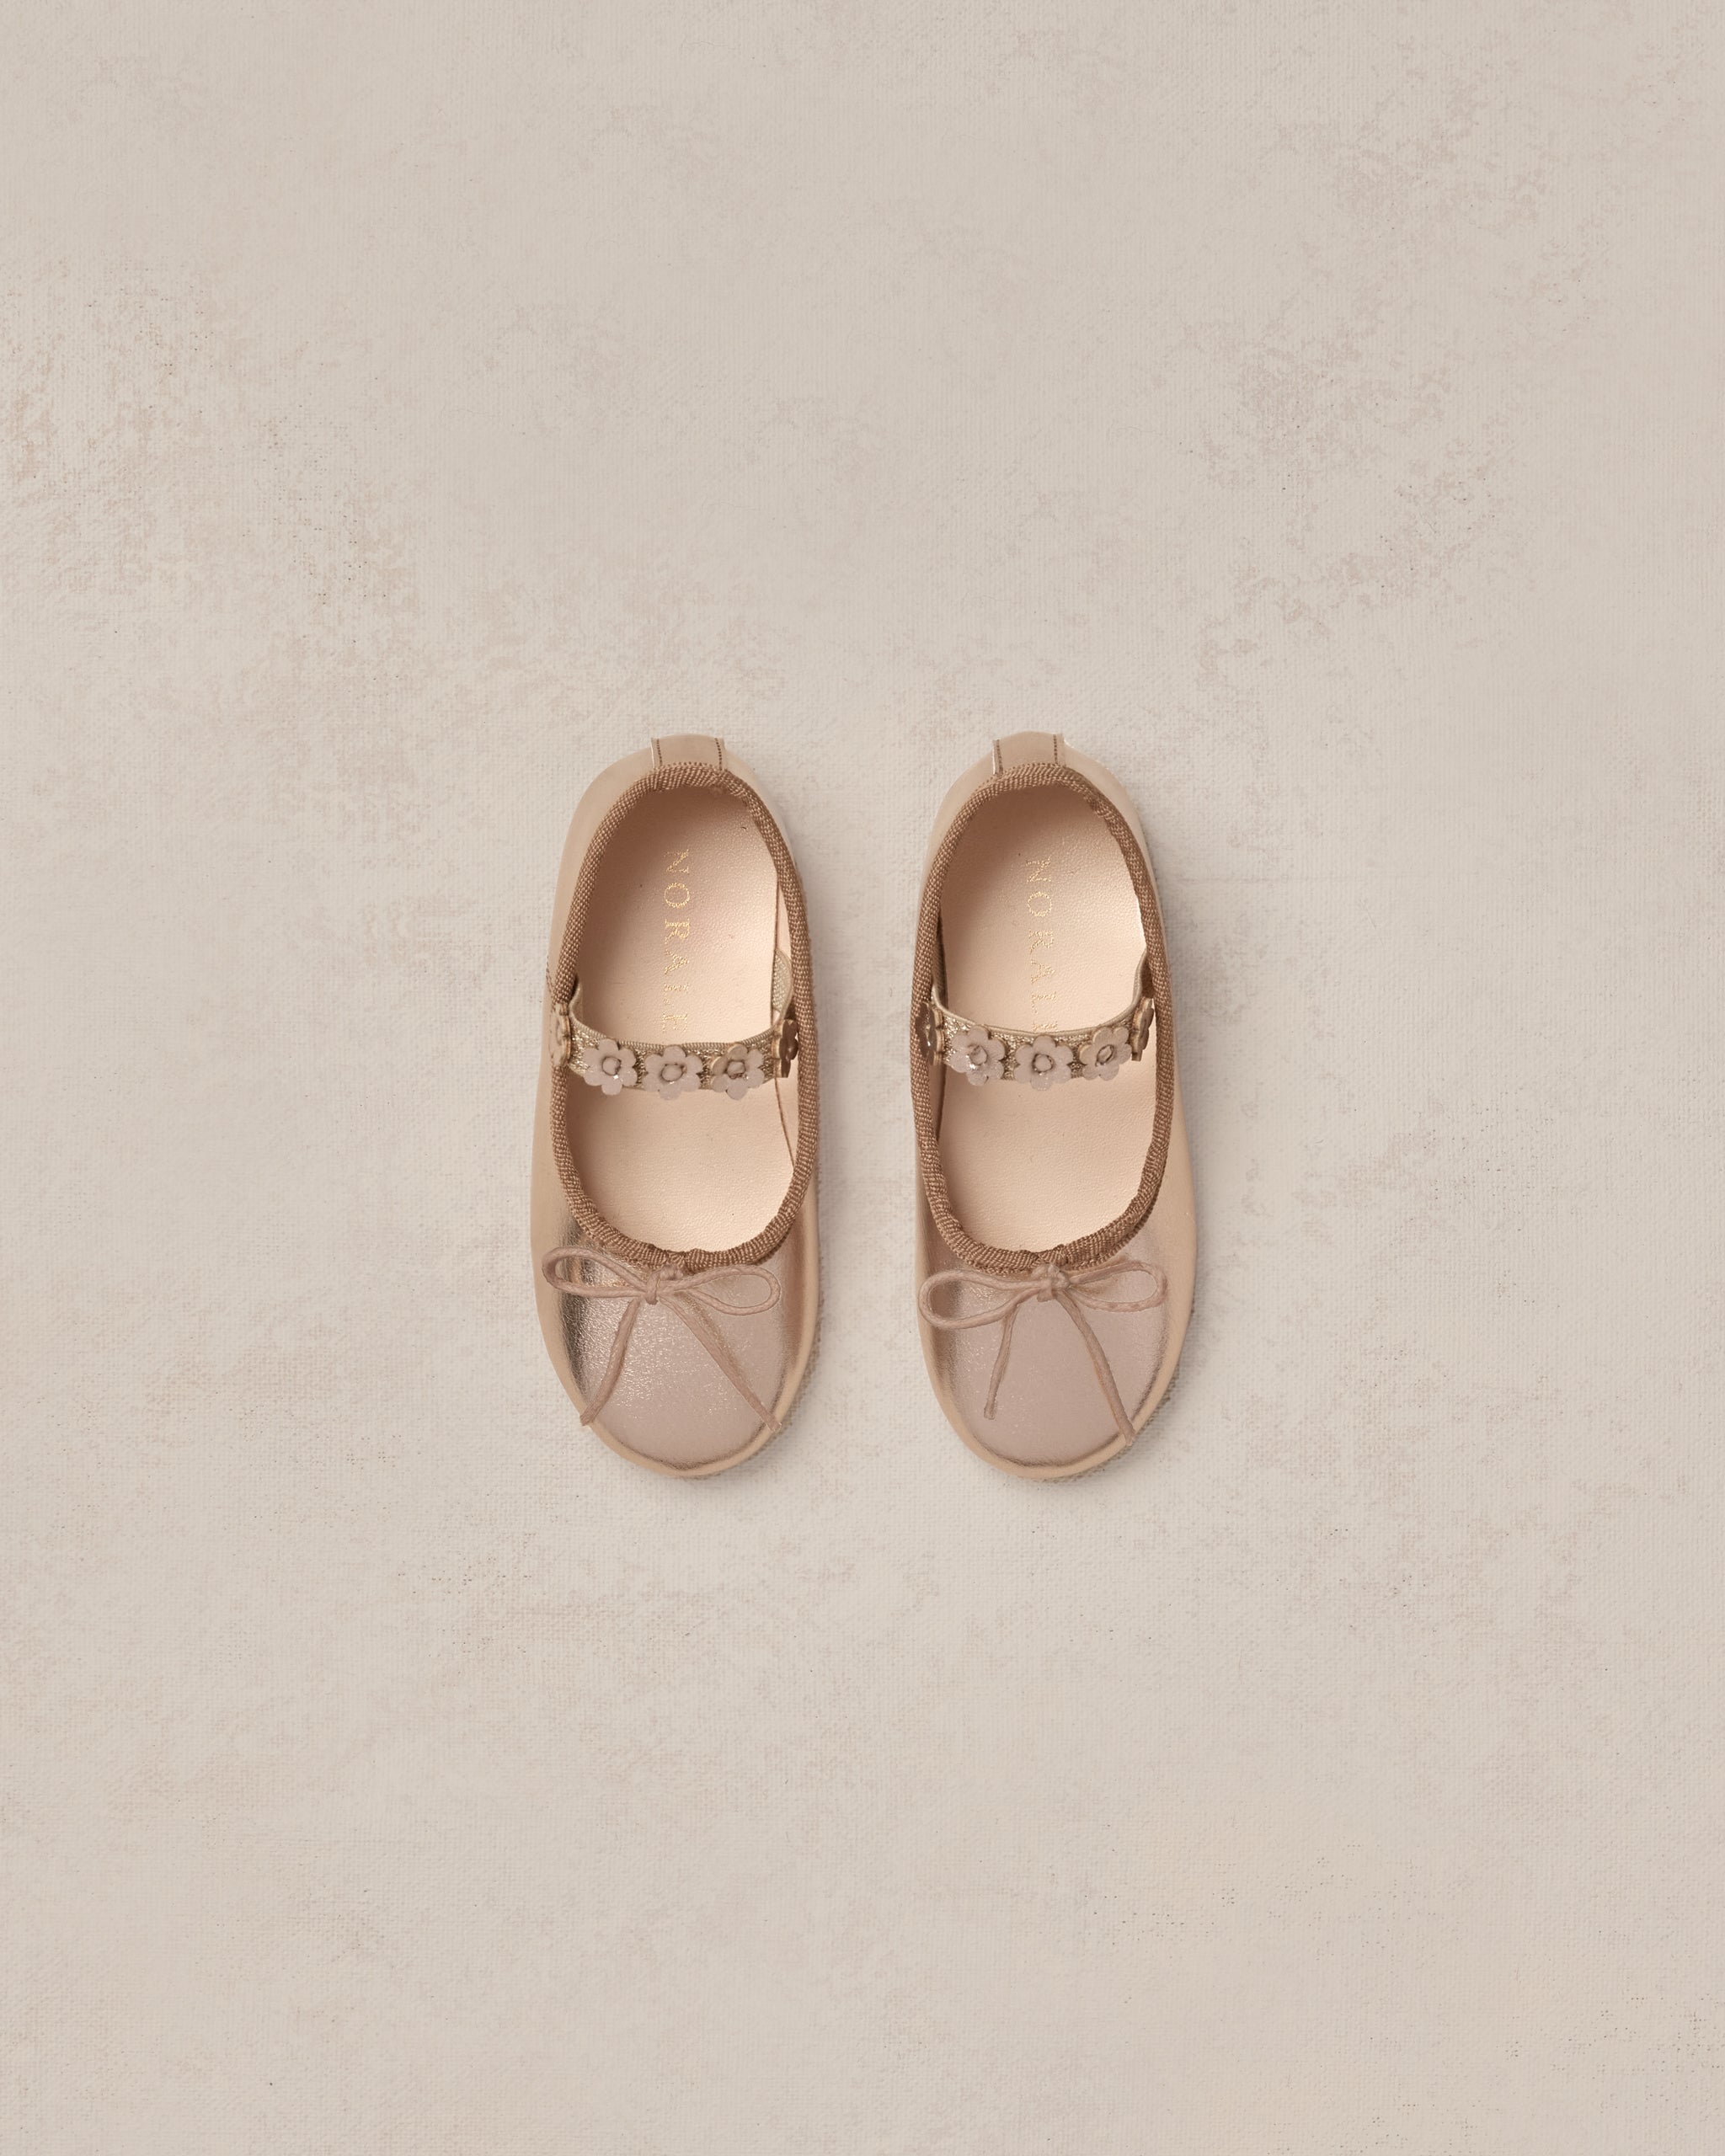 Ballet Flats || Champagne Metallic - Rylee + Cru | Kids Clothes | Trendy Baby Clothes | Modern Infant Outfits |